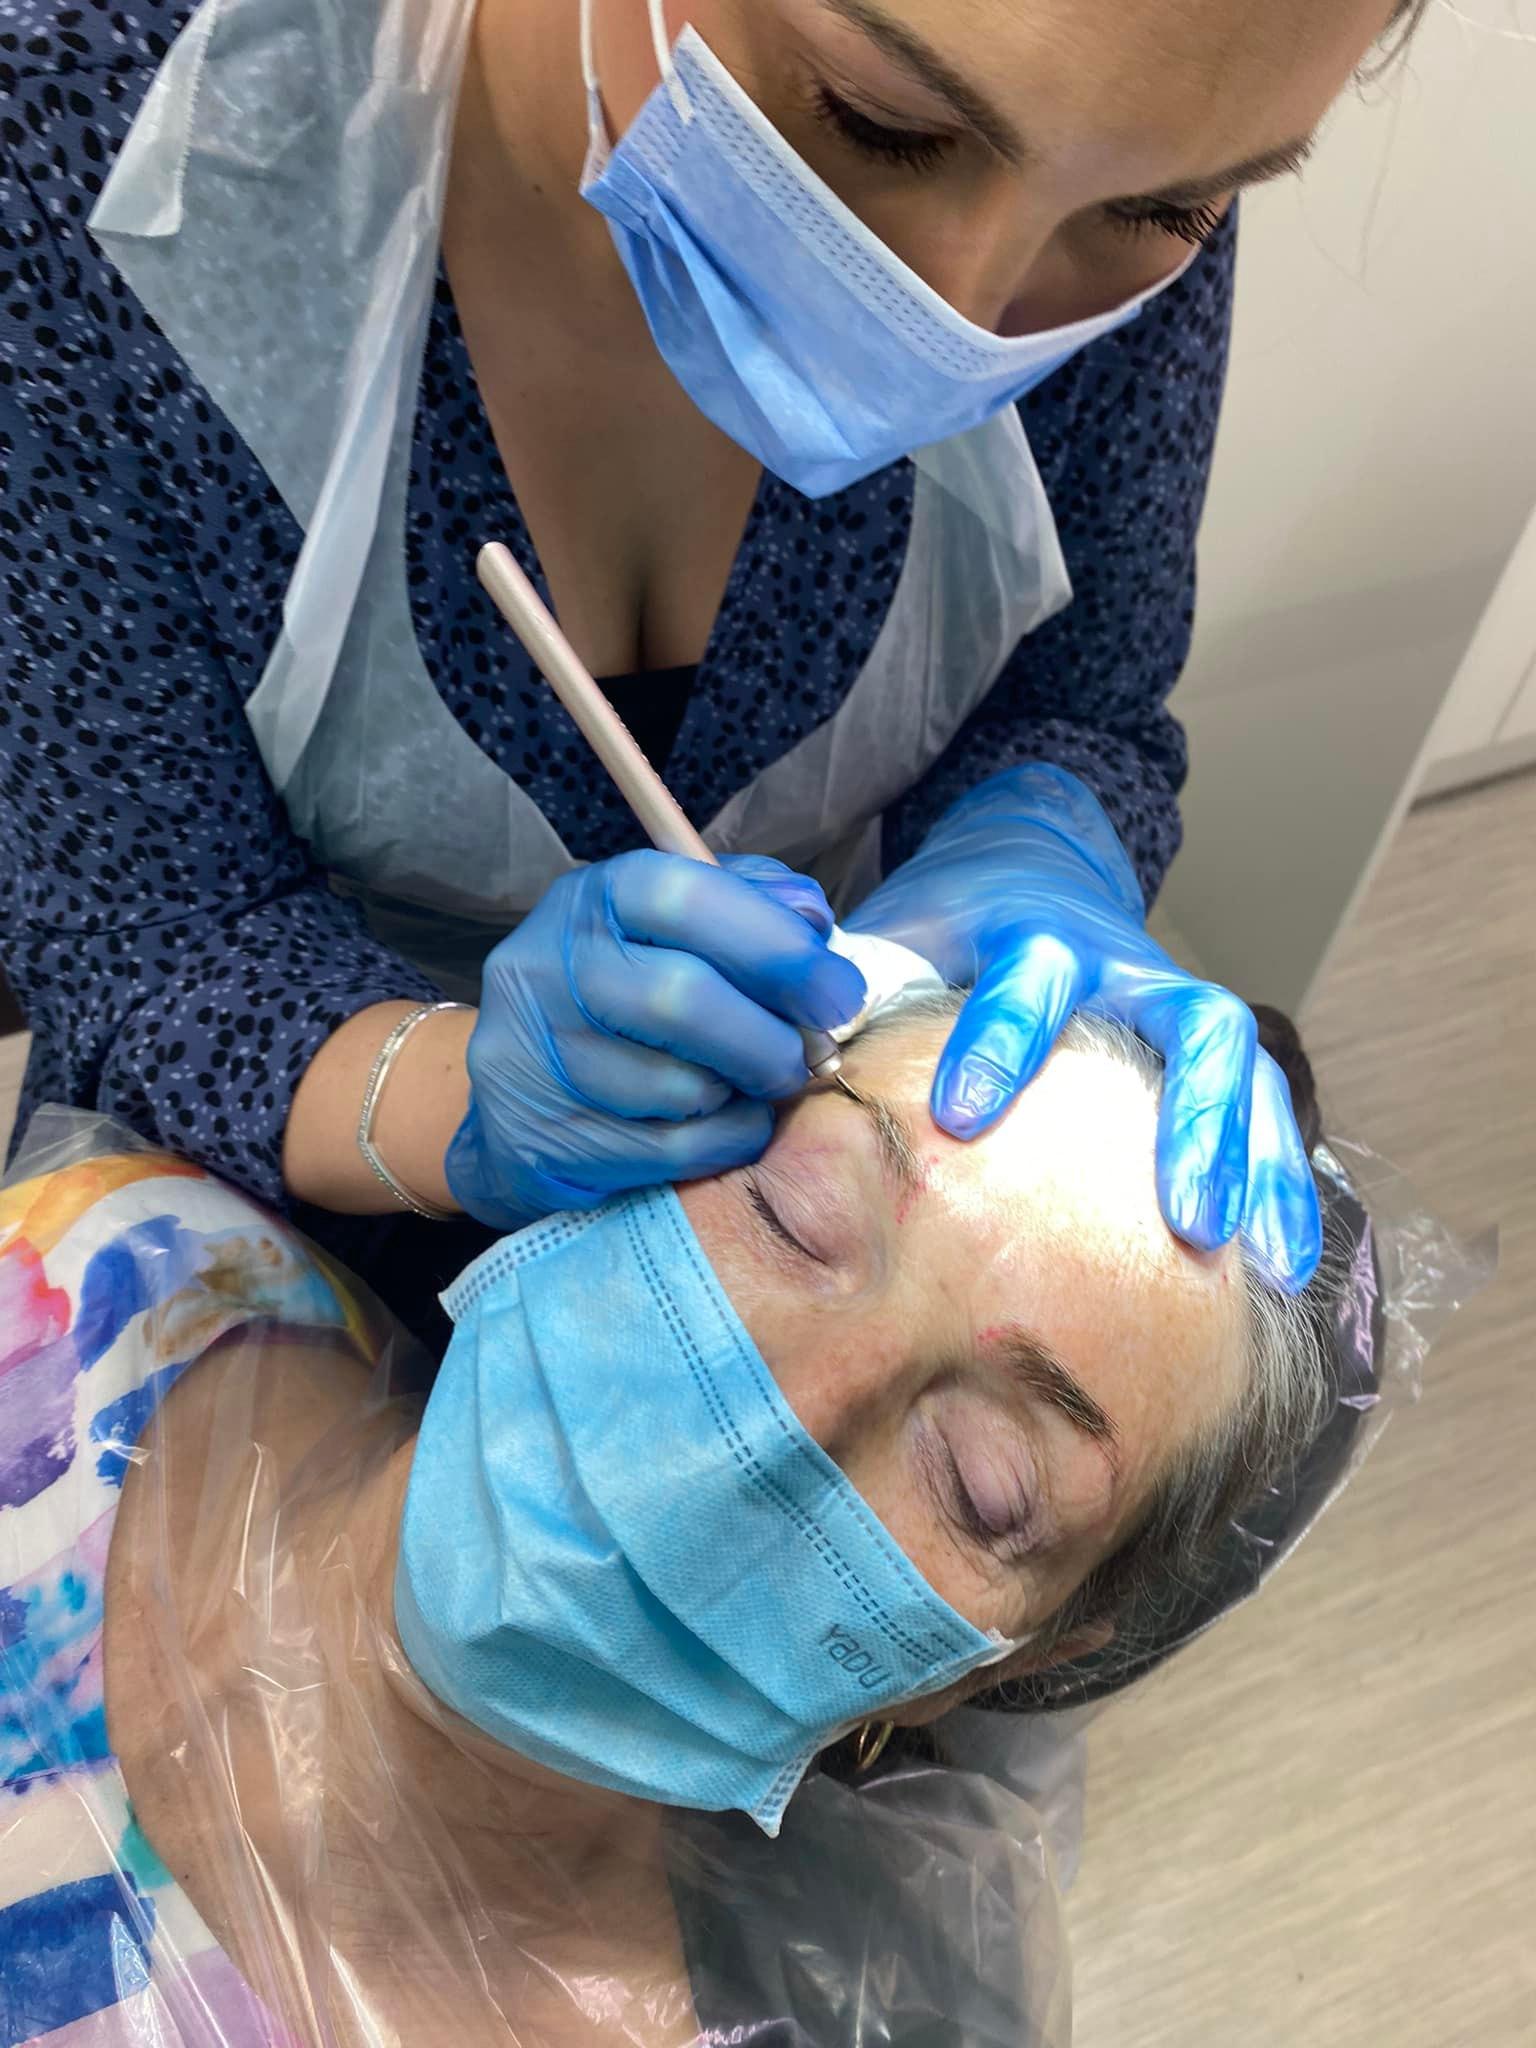 Stacey microblading a client's eyebrow